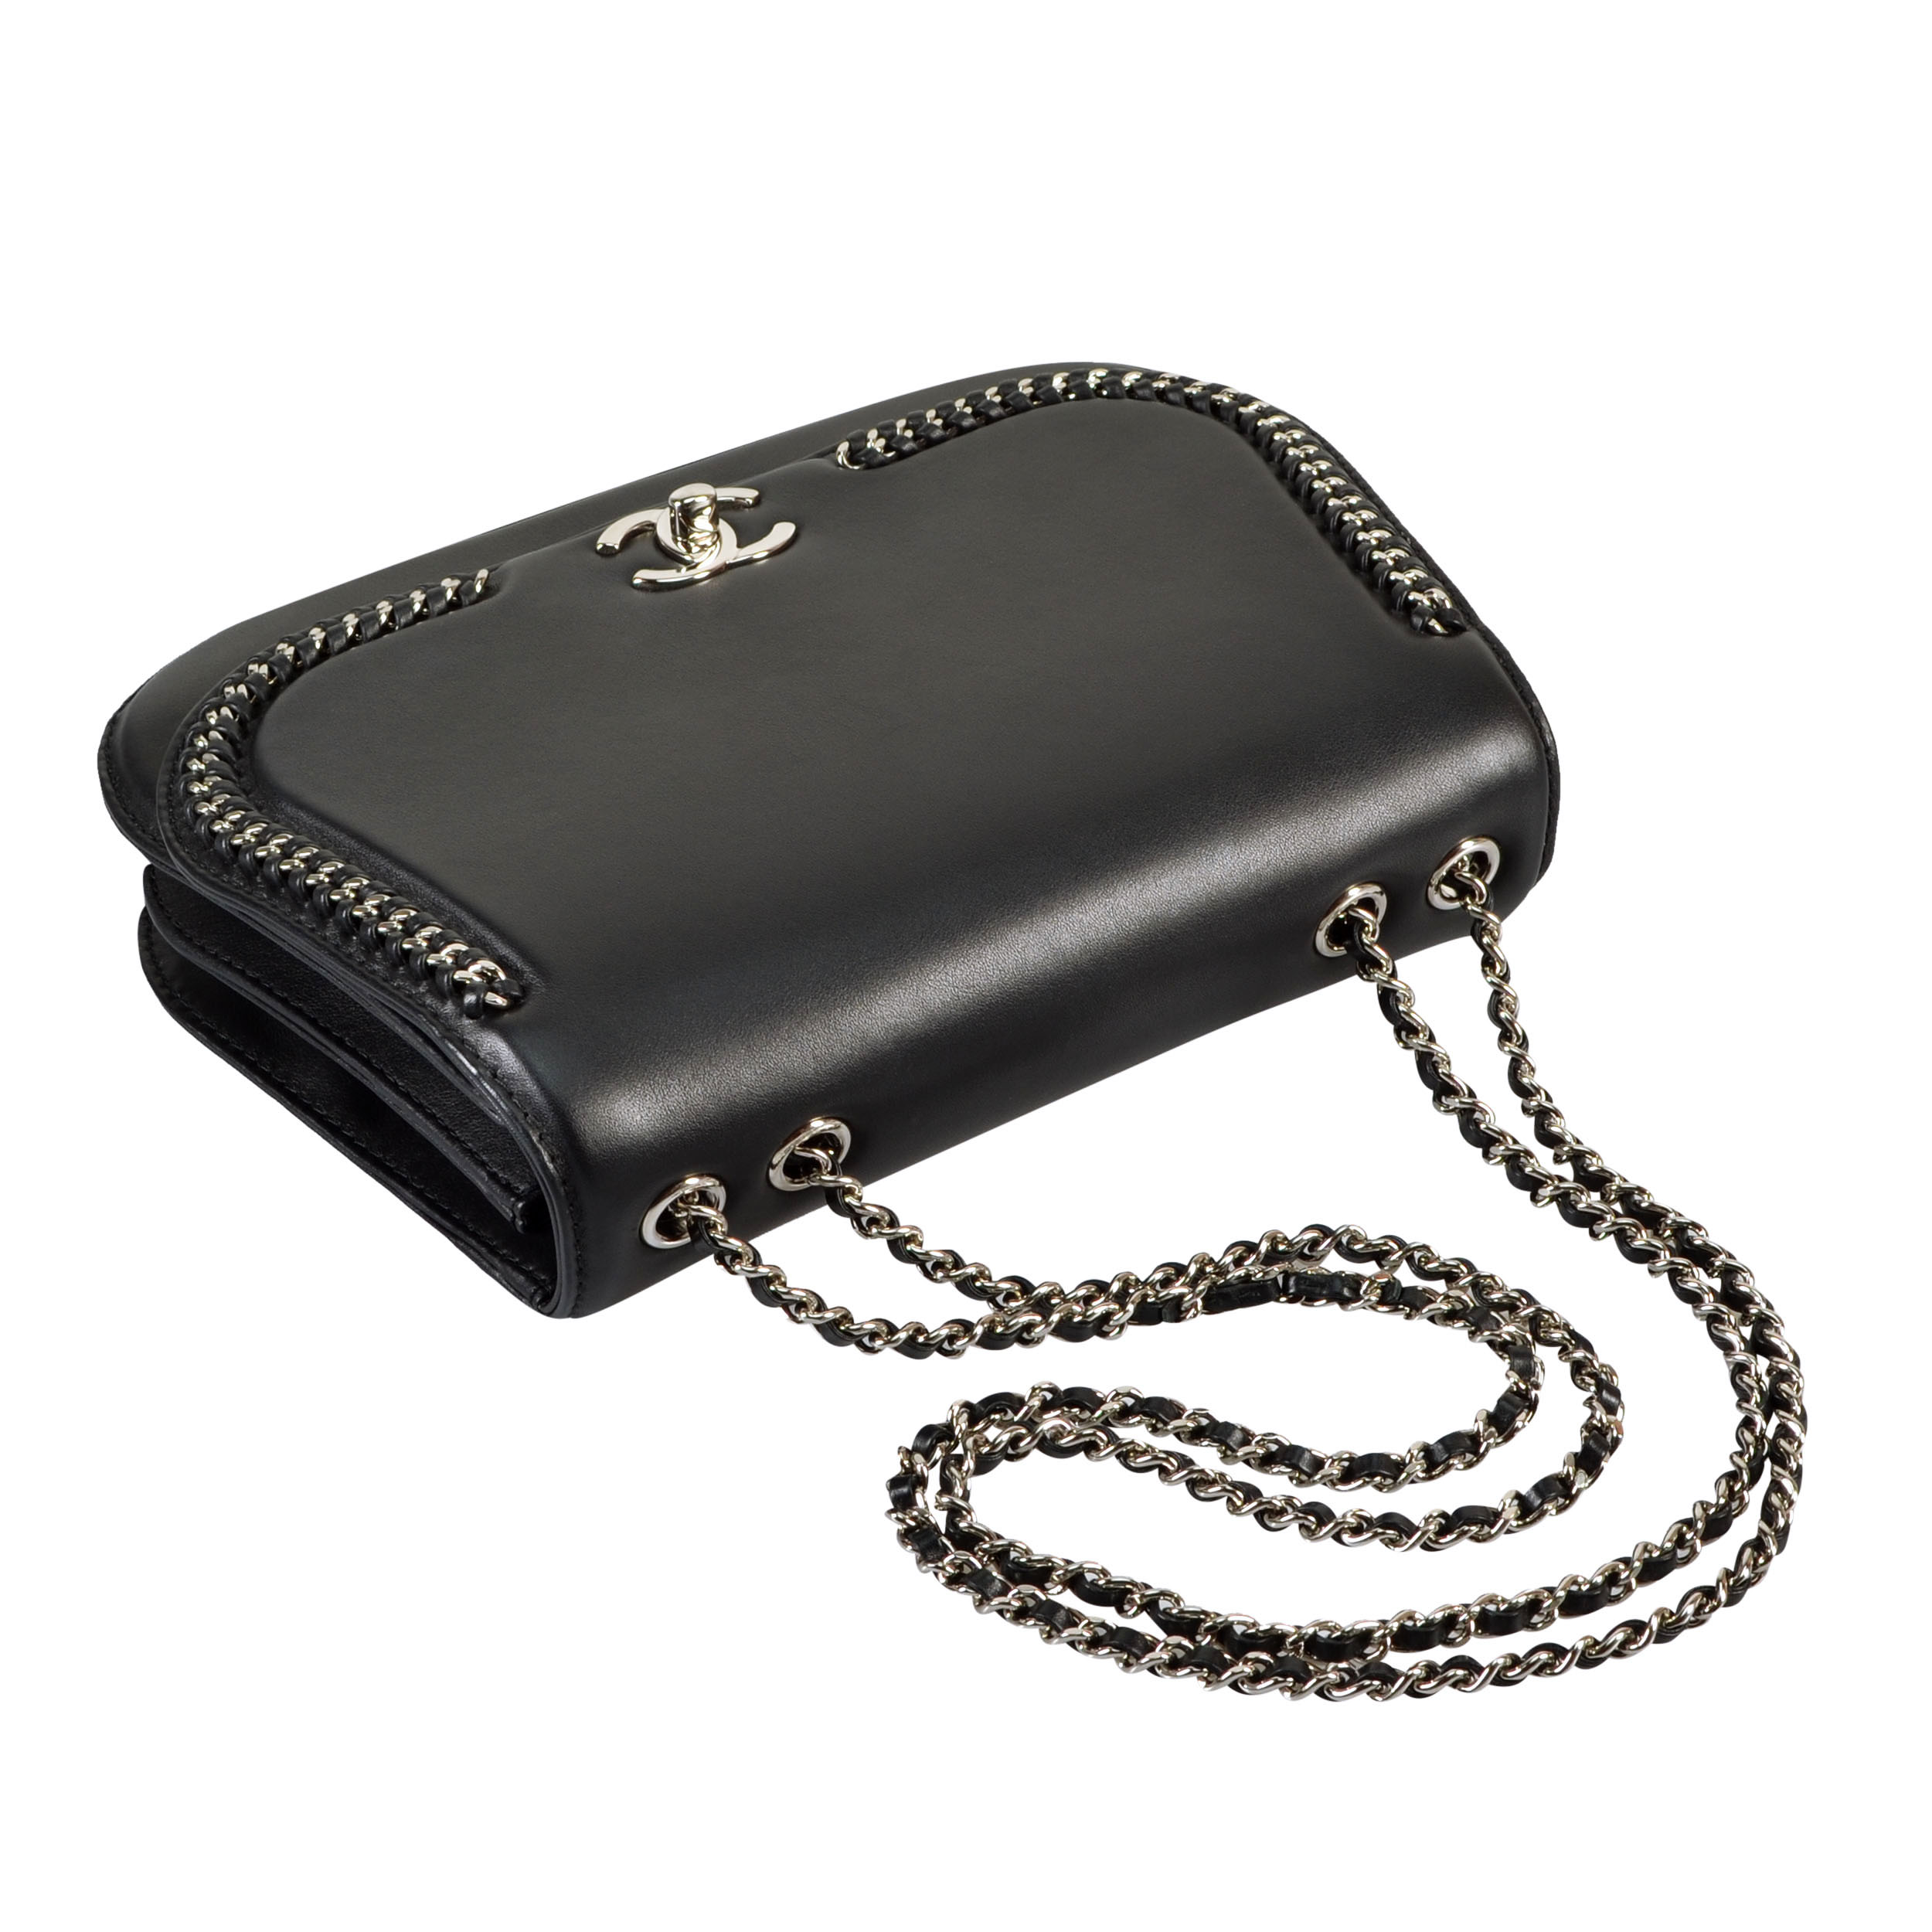 CHANEL Braided Chic Flap Bag Black - MyLovelyBoutique